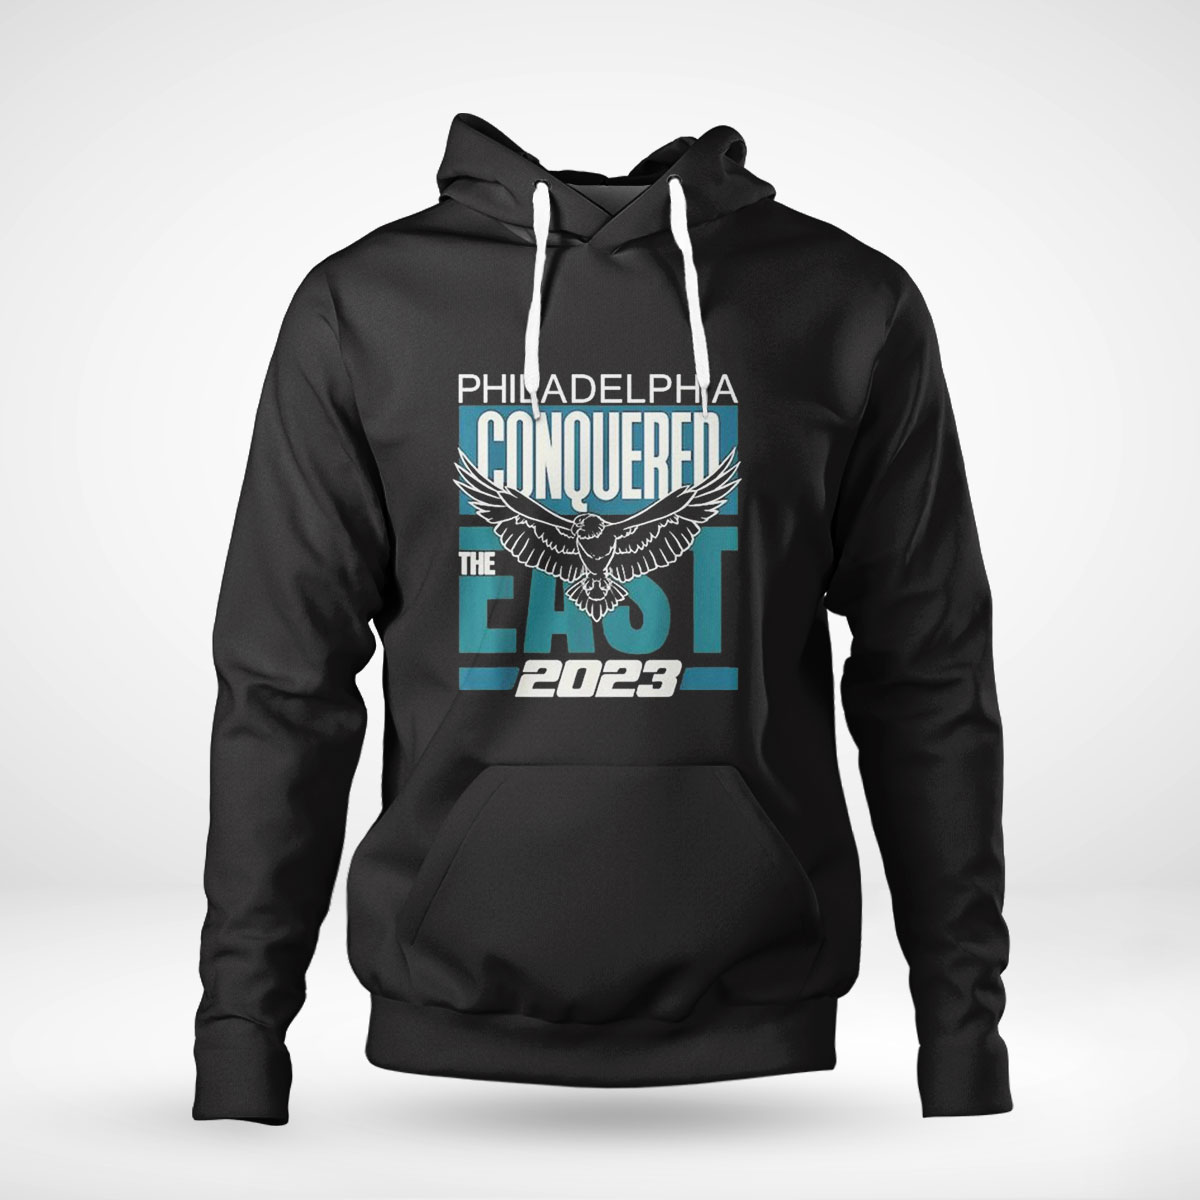 Philly Conquered The East 2023 Philadelphia Fan Shirt Longsleeve